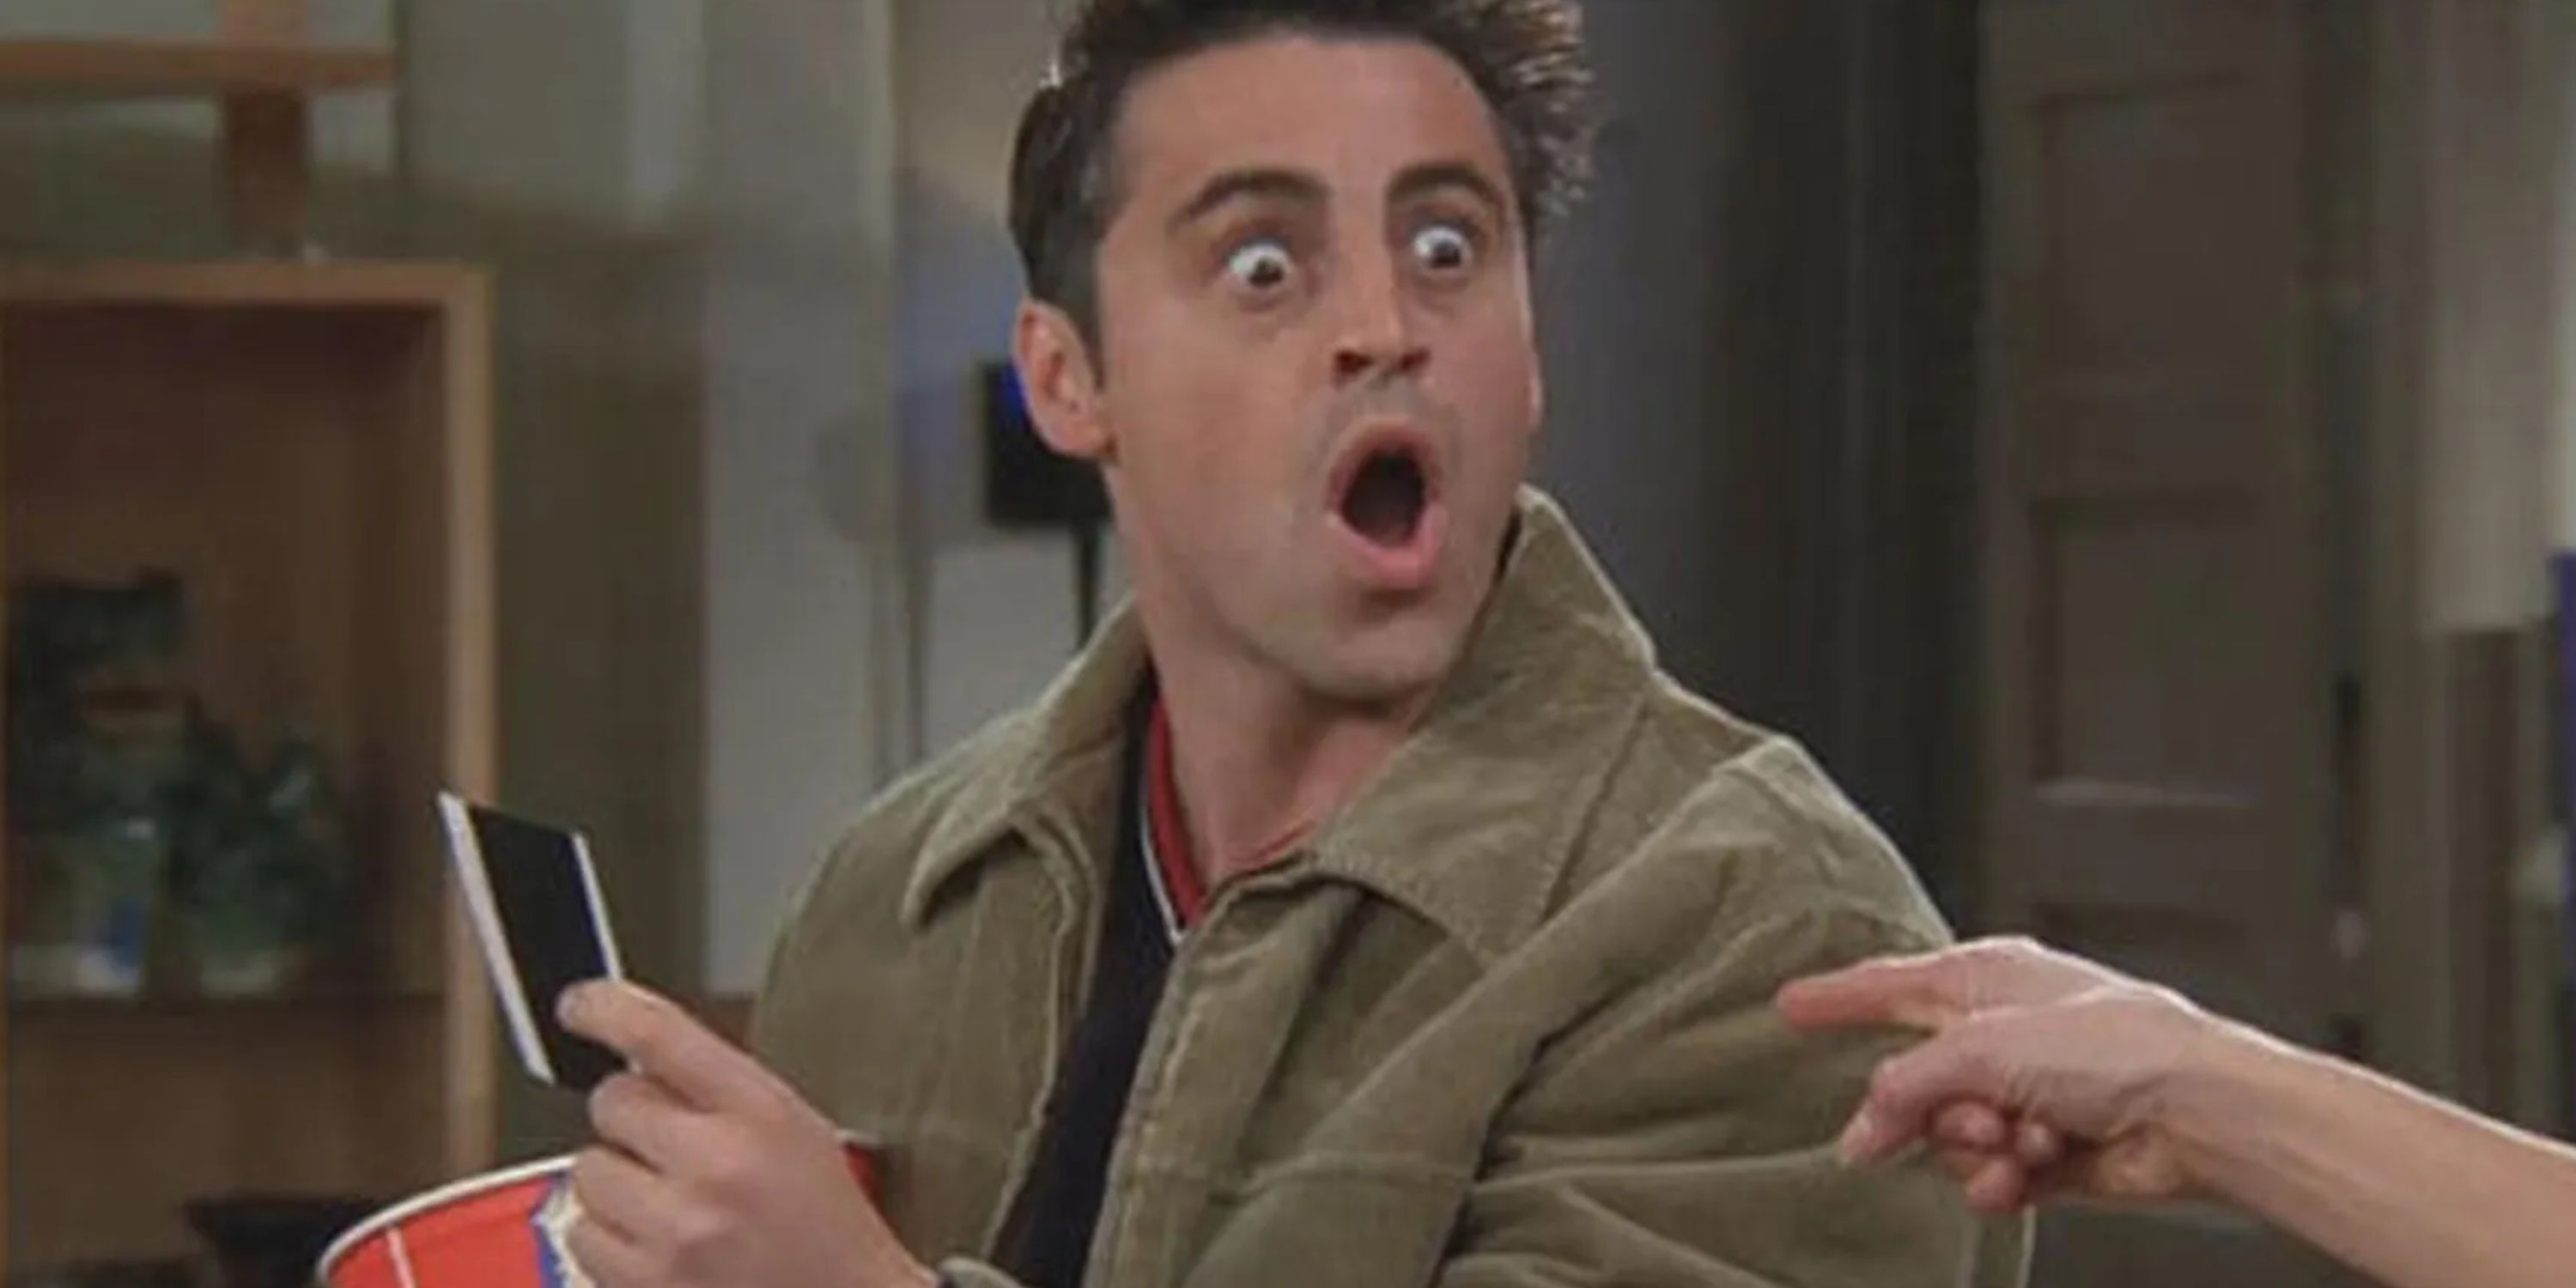 Joey Tribani From Friends Making a Funny Face